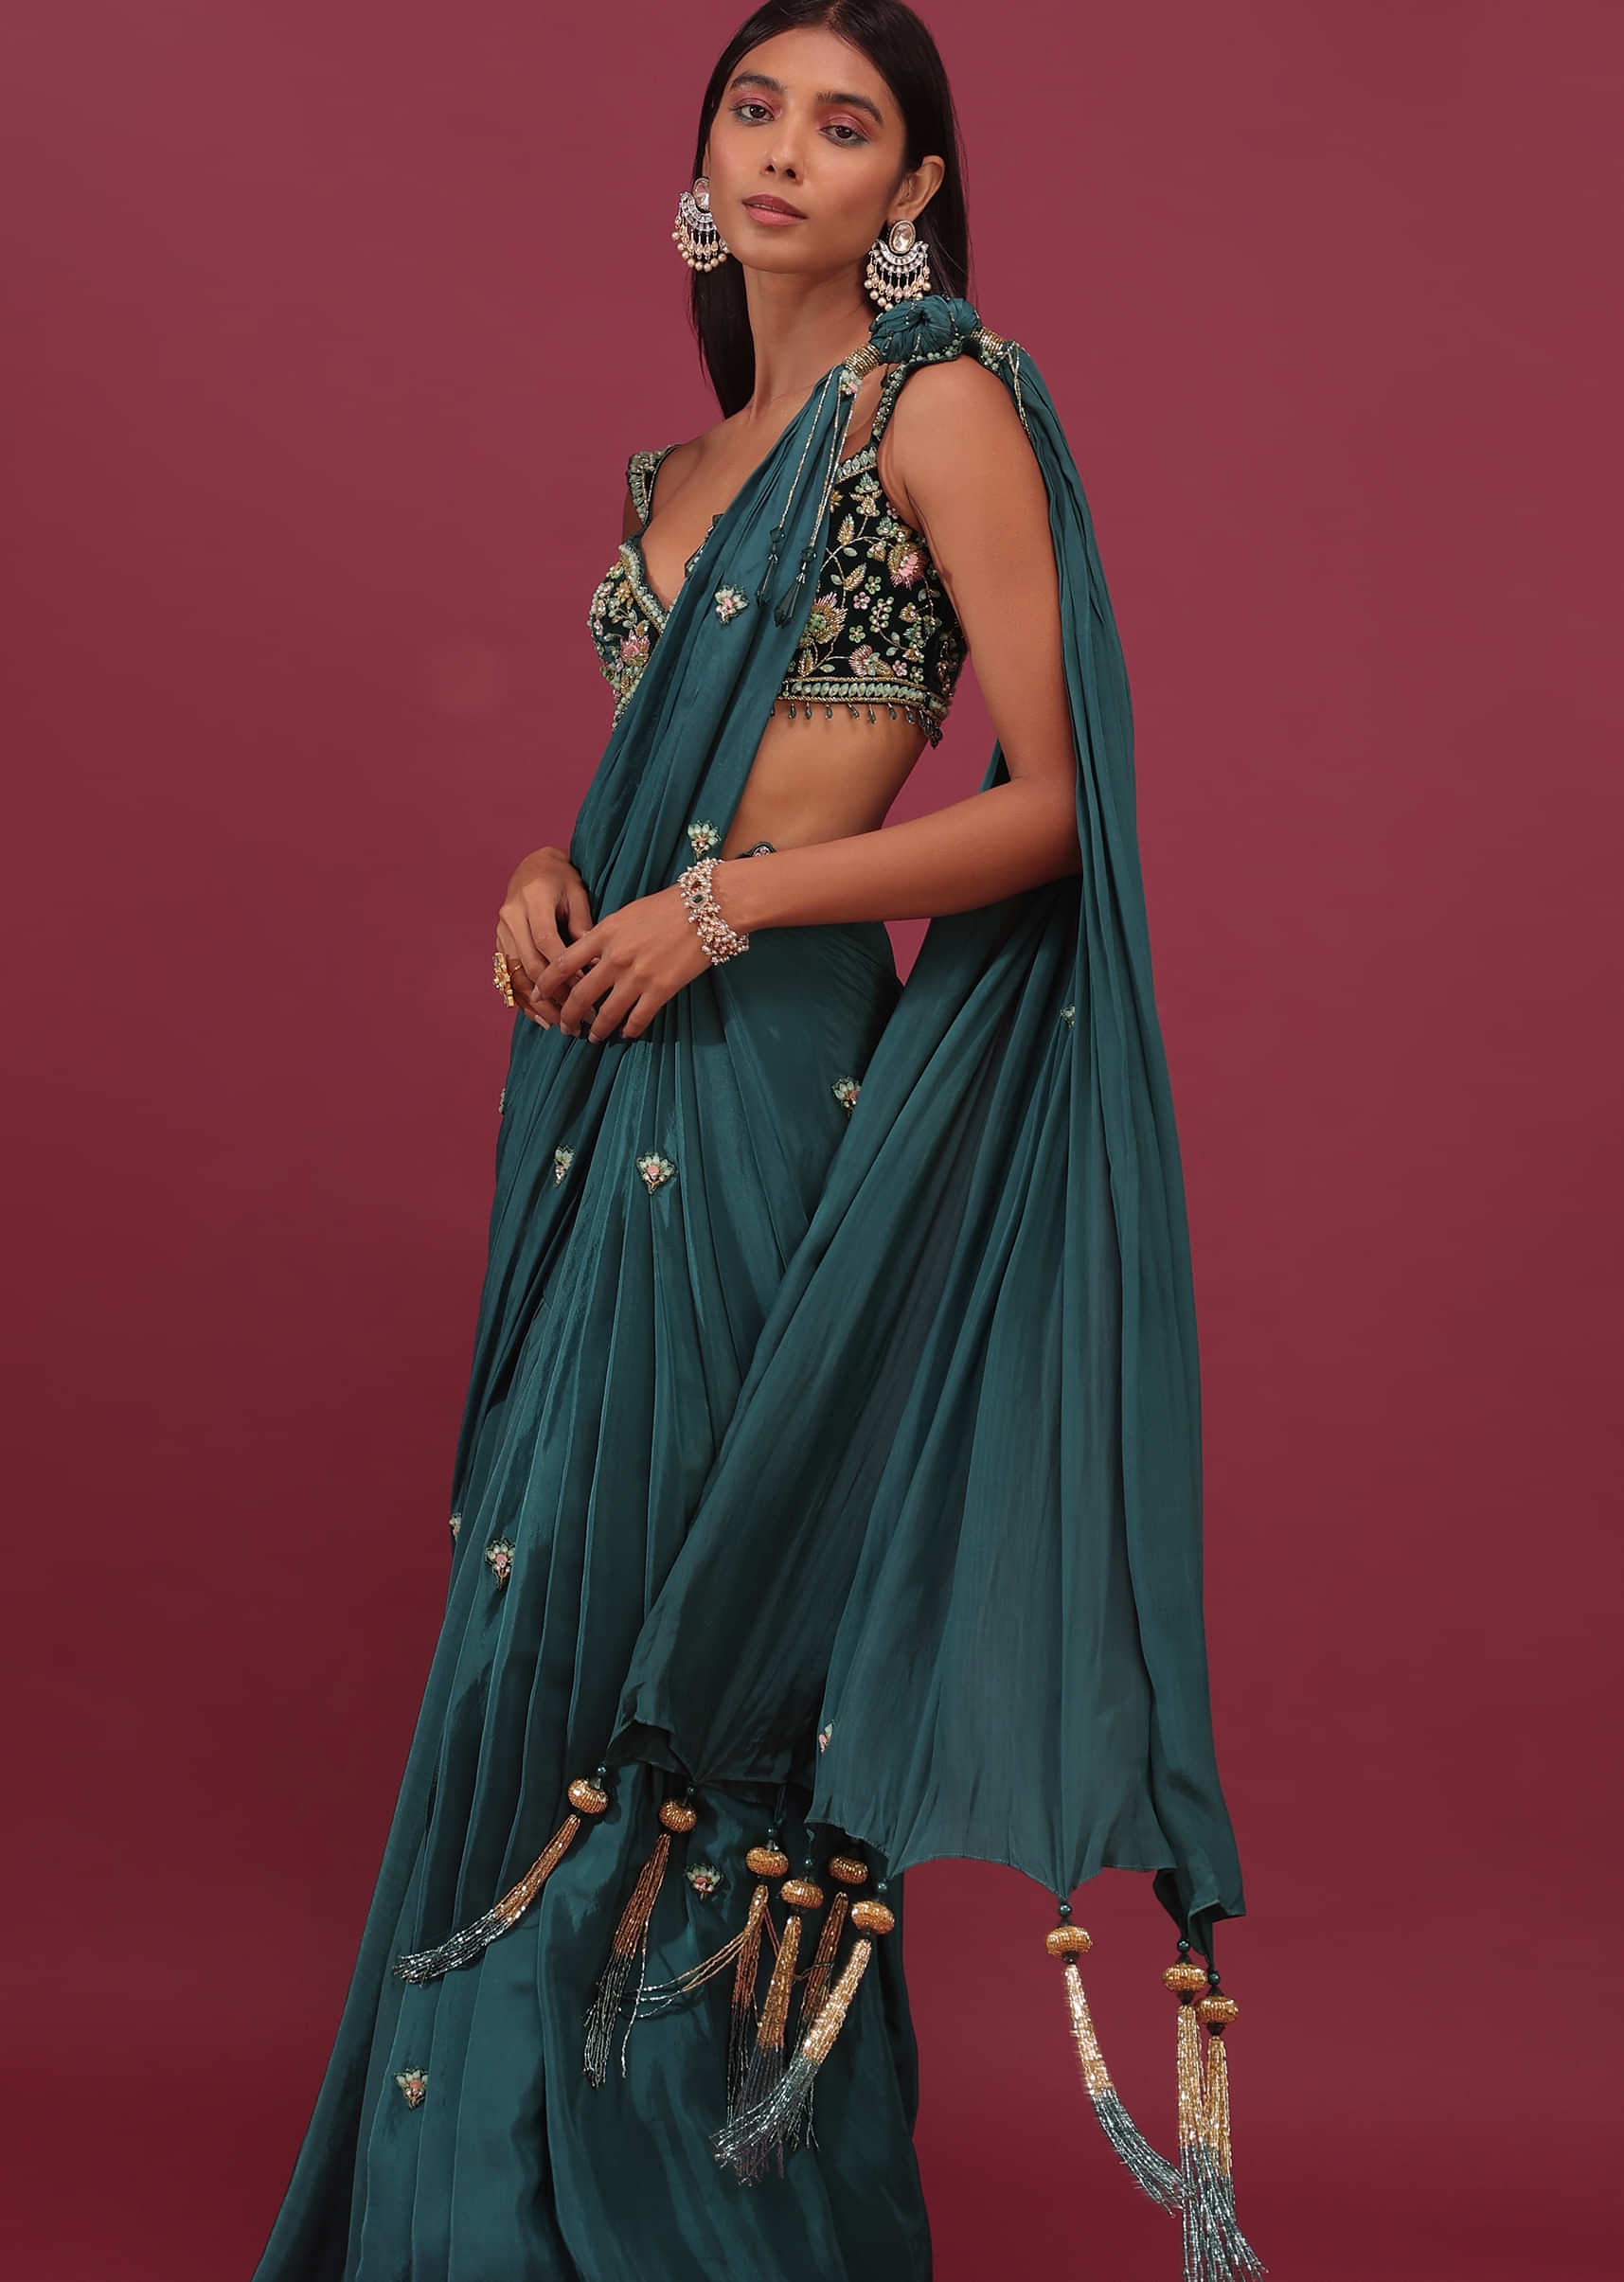 Pre-Pleated Emerald Green Saree With Floral Buttis And A Embroidered Blouse - NOOR 2022